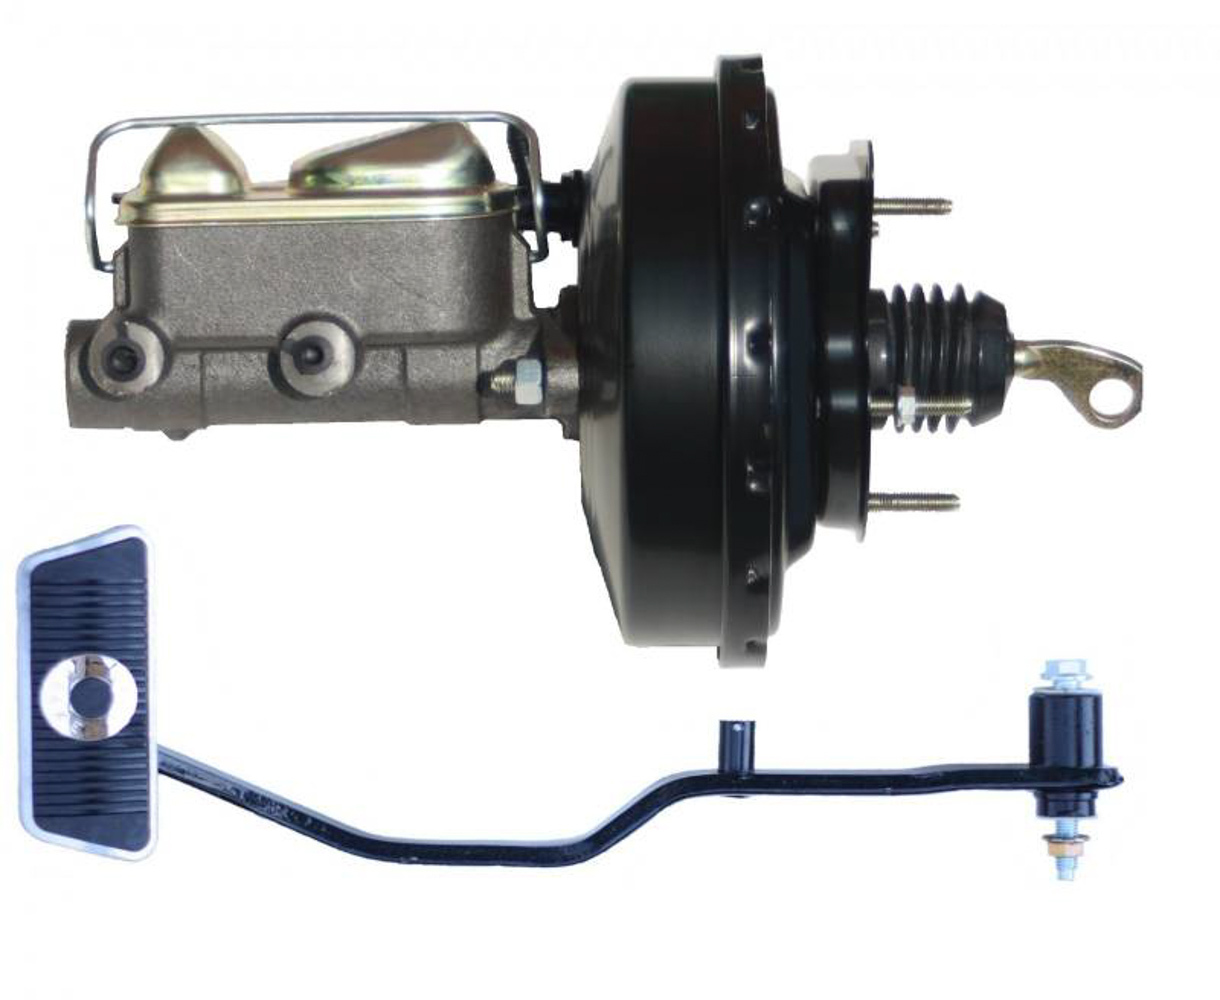 Leed Brakes 034PA Master Cylinder and Booster, 1 in Bore, Dual Integral Reservoir, 9 in OD, Single Diaphragm, Brake Pedal Included, Steel, Black / Natural, Ford Mustang 1967-70, Kit